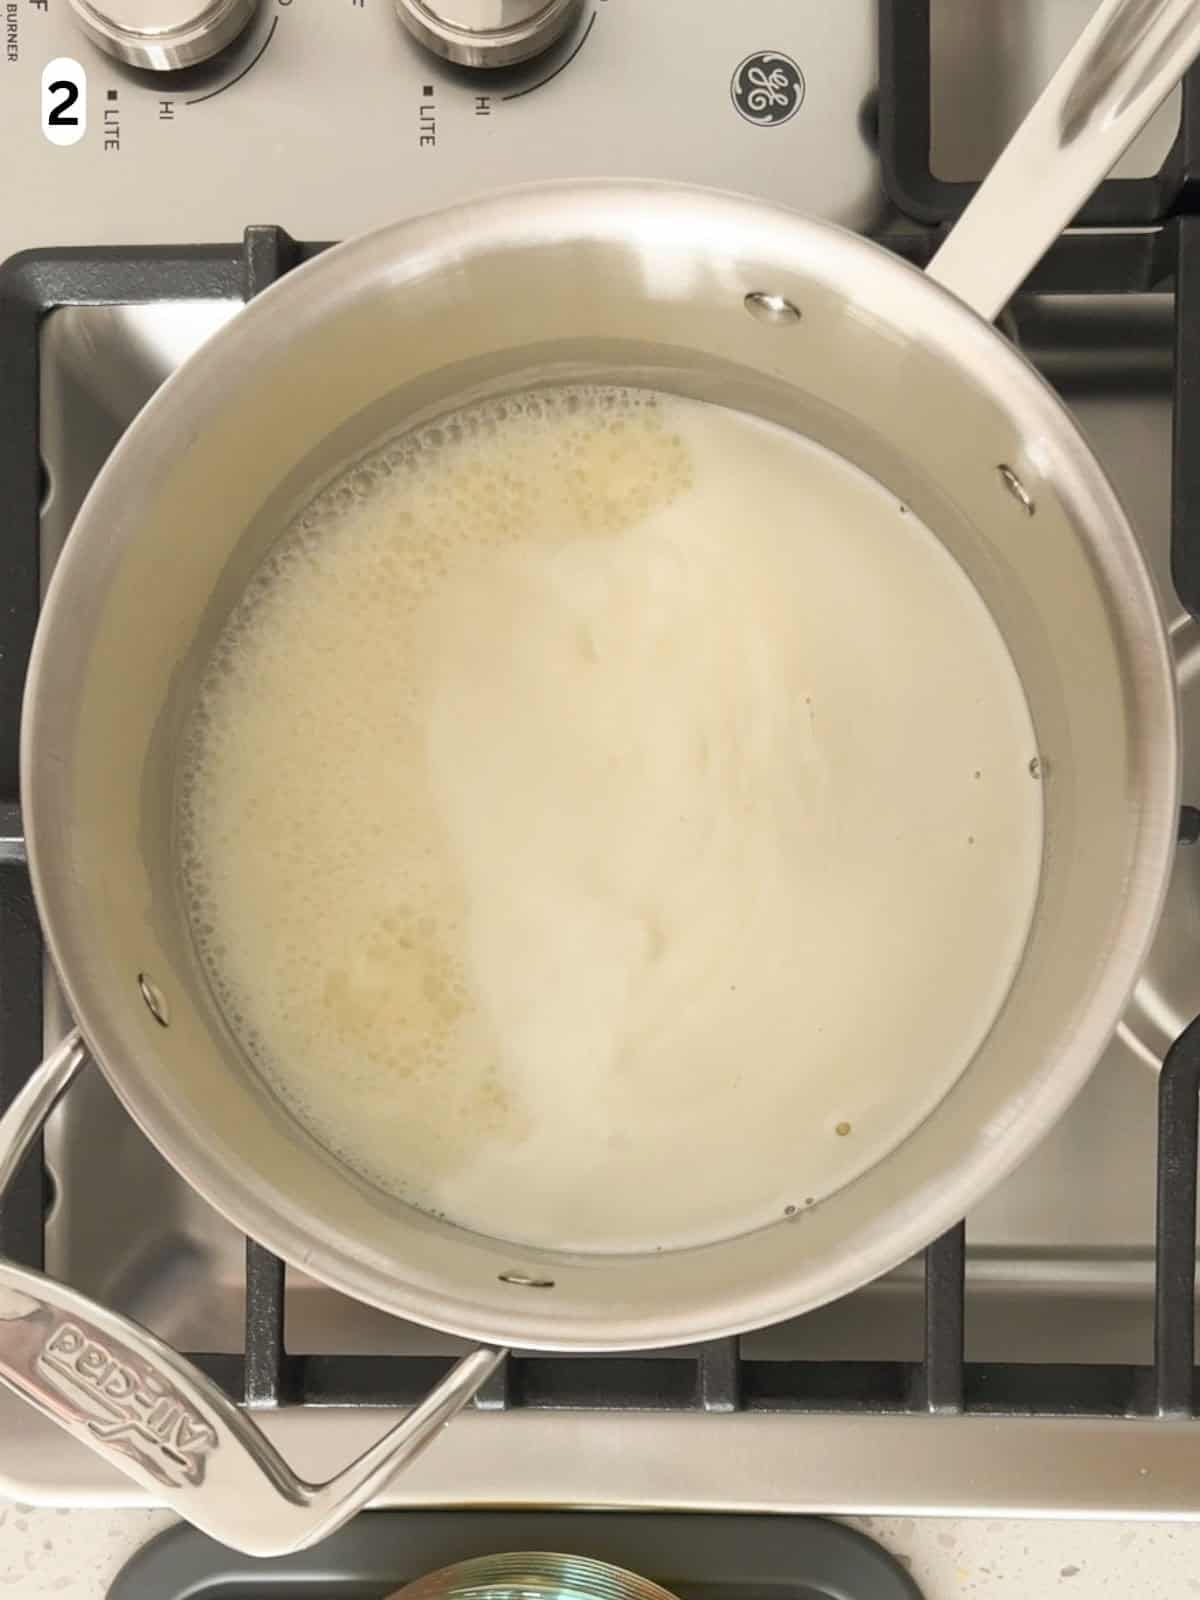 The milk, cream, and sugar are brought to a simmer.